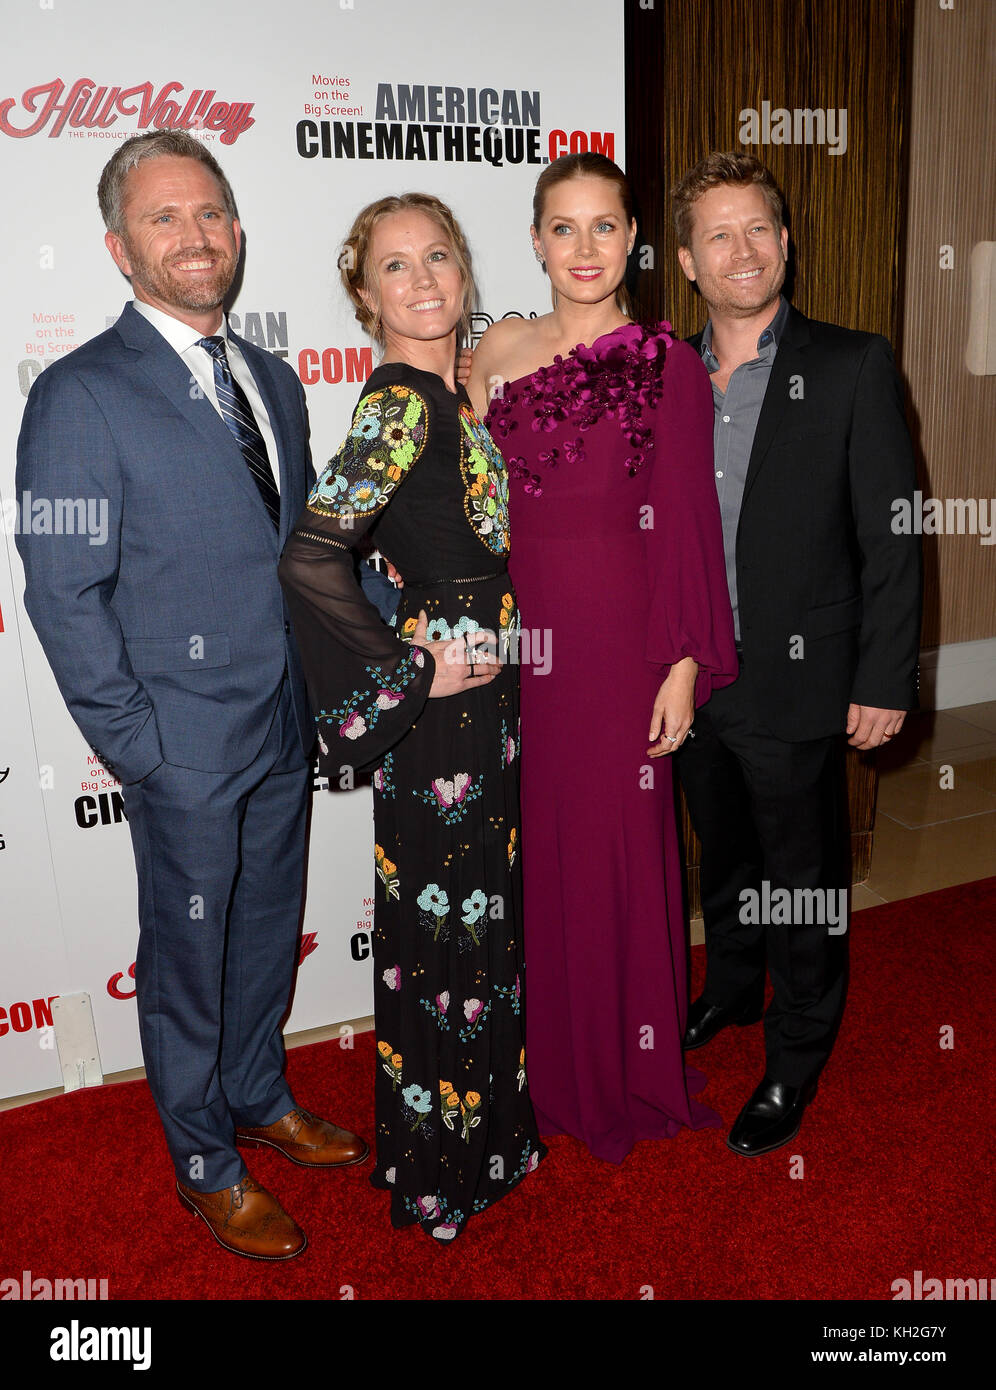 BEVERLY HILLS, CA. November 10, 2017: Amy Adams & sister AnnaMarie & brothers Dan & Eddie at the American Cinematheque 2017 Award Show at the Beverly Hilton Hotel Picture: Sarah Stewart Stock Photo